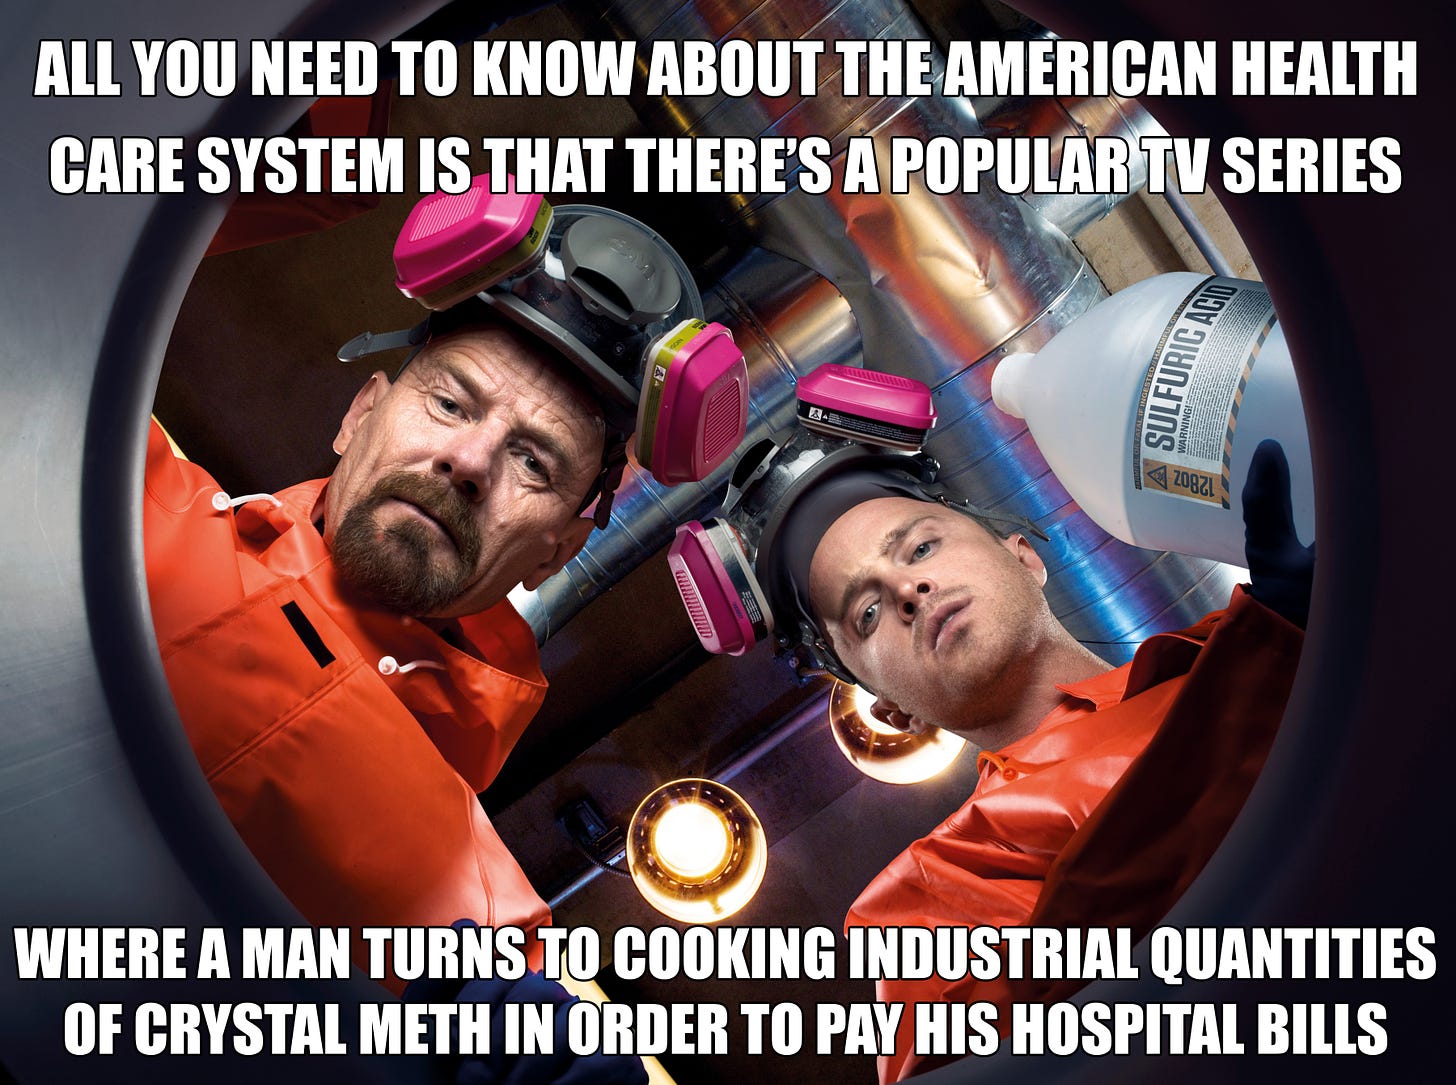 All you need to know about the American healthcare system - Imgur